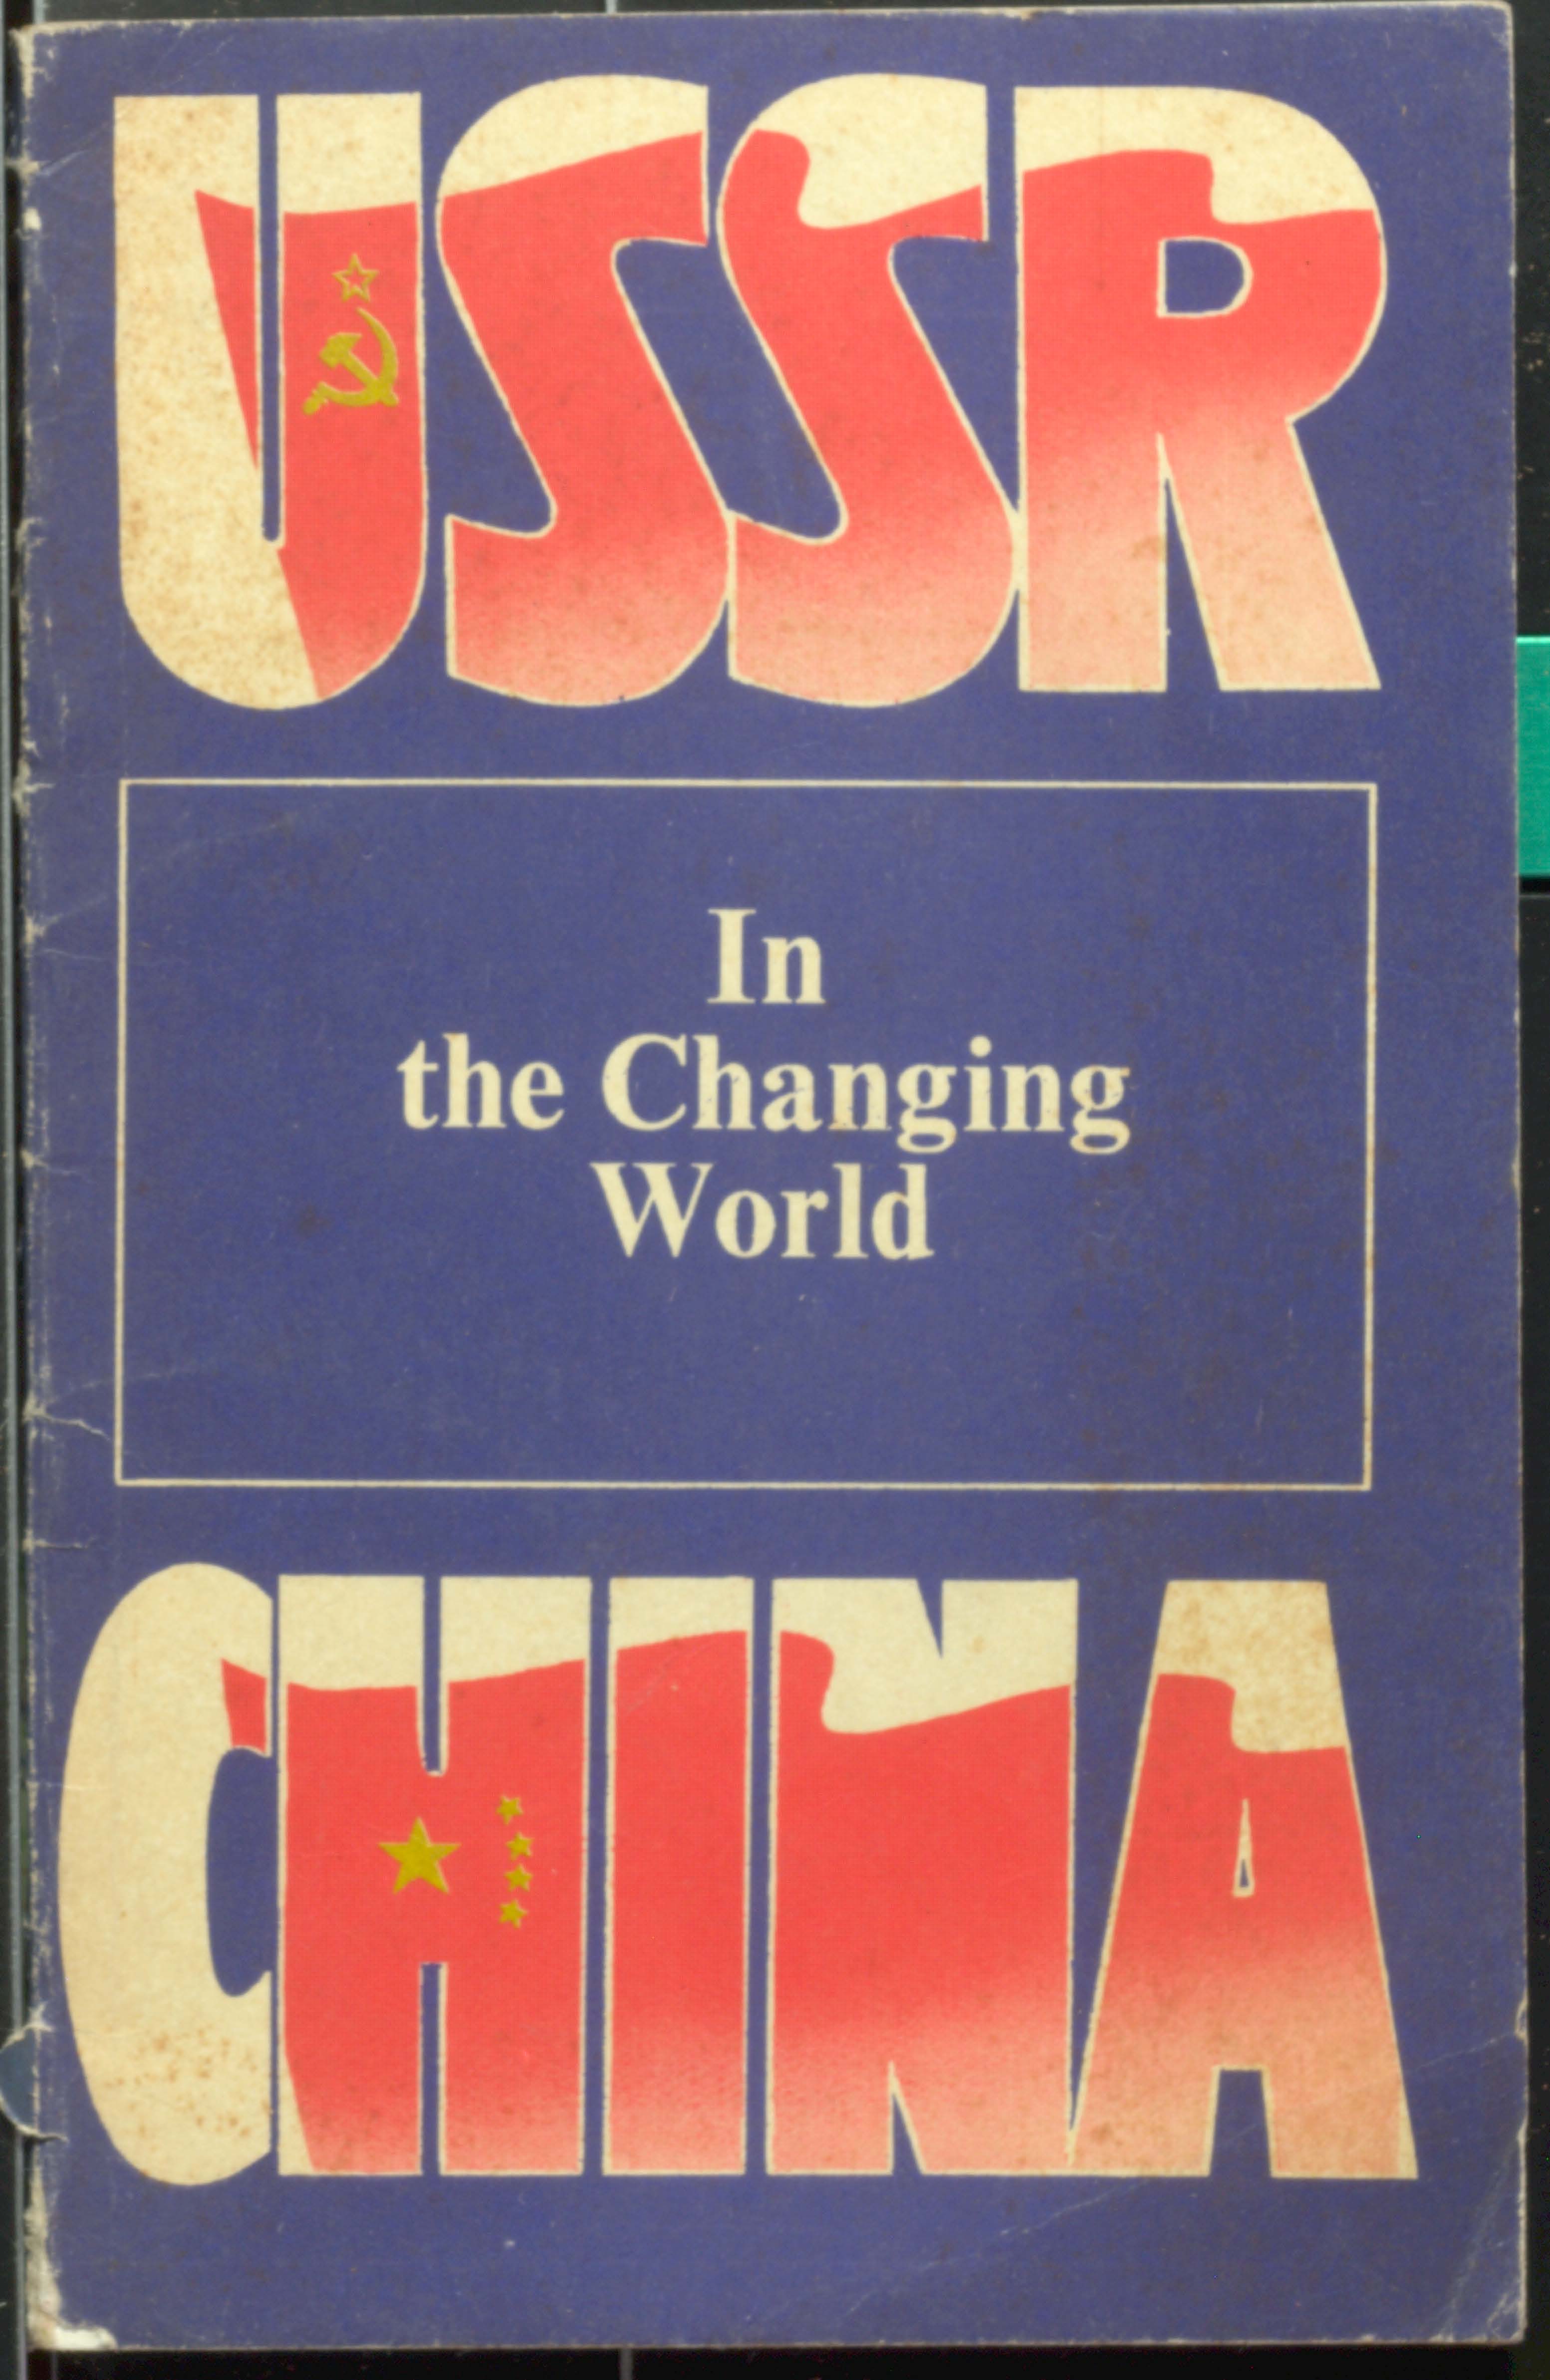 USSR in the changing world china